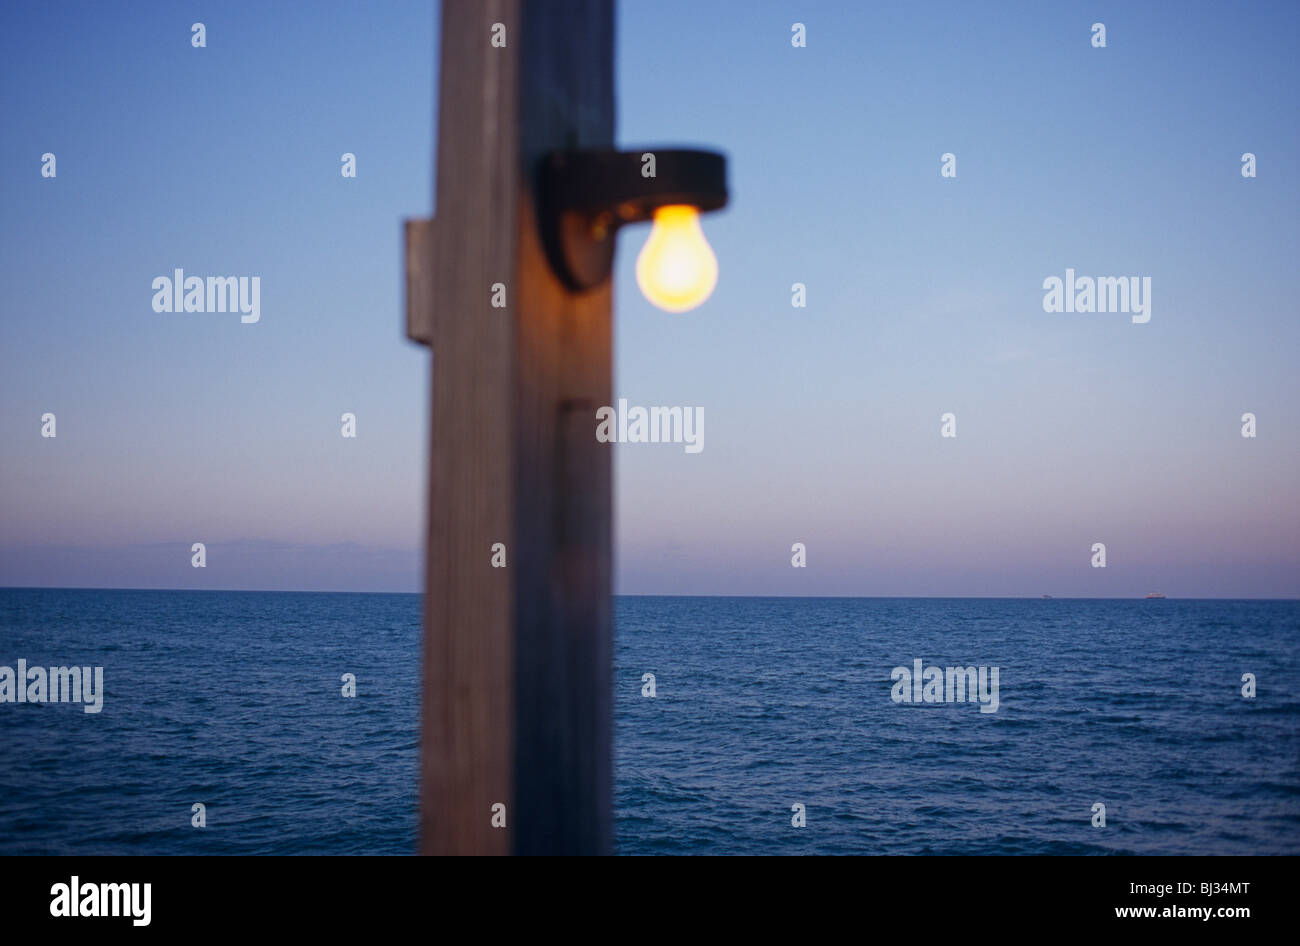 Out of focus post with a light bulb attached, shines in the bright daylight with the Atlantic Ocean beyond. Stock Photo